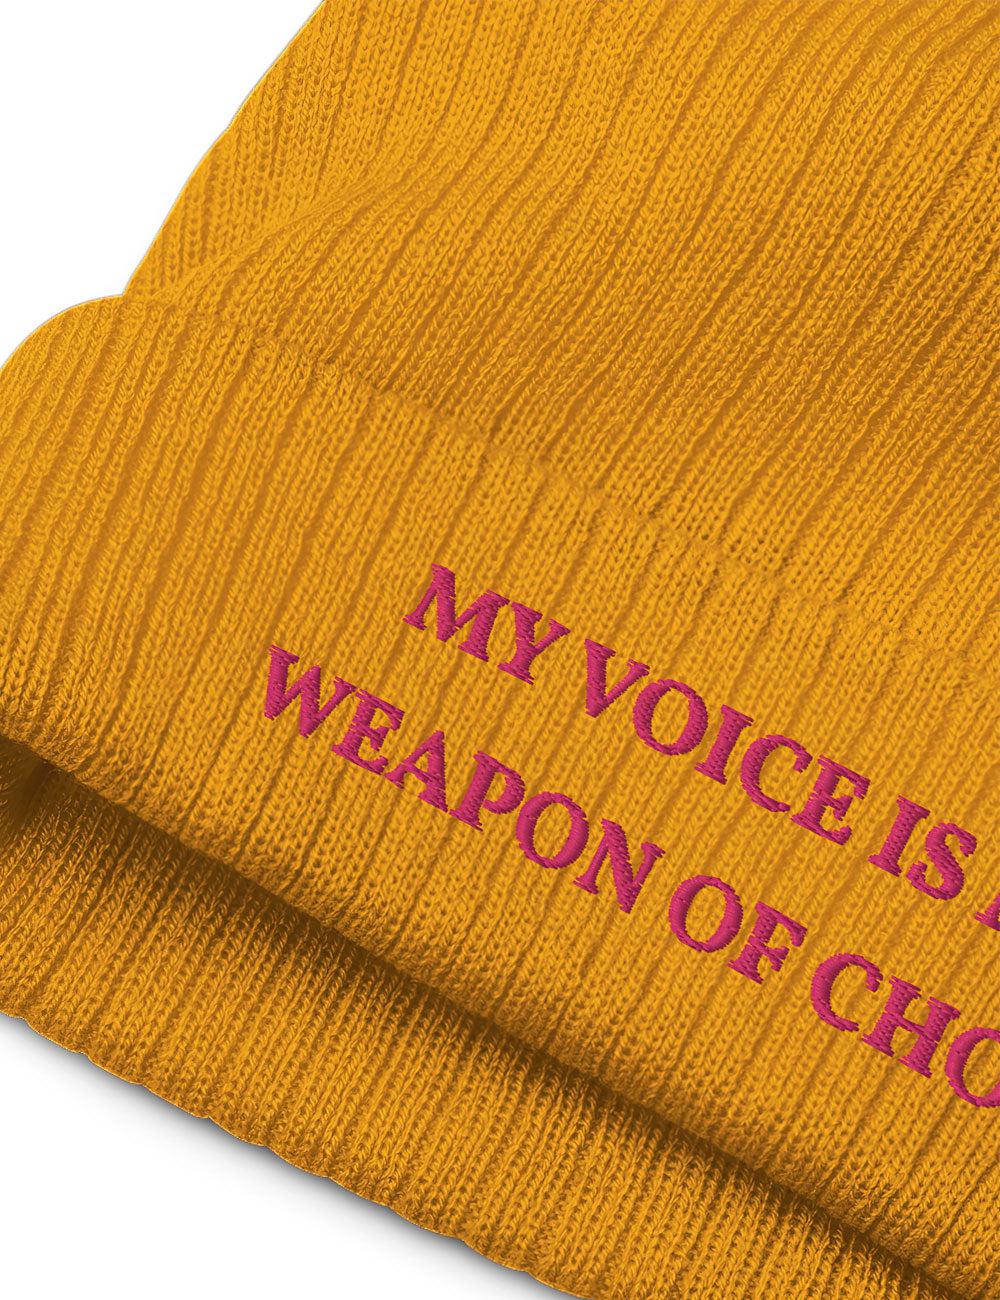 "Weapon of Choice" Ribbed Knit Embroidered Beanie